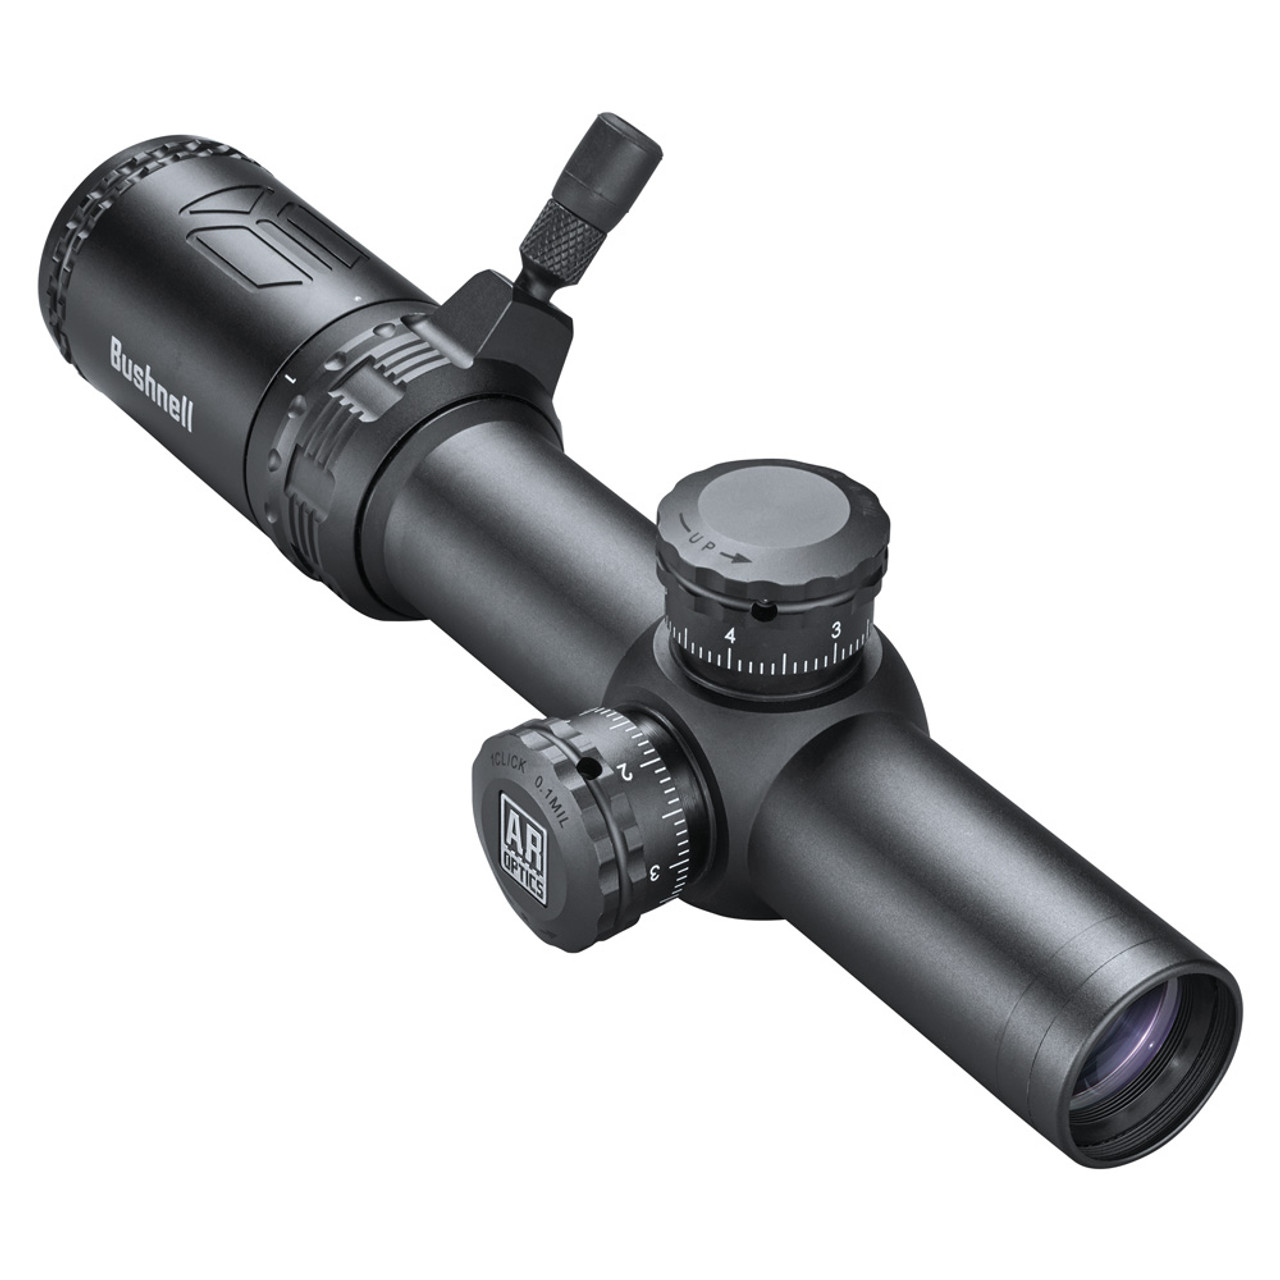 Bushnell 1-4x24 AR 223 BDC Tactical Scope